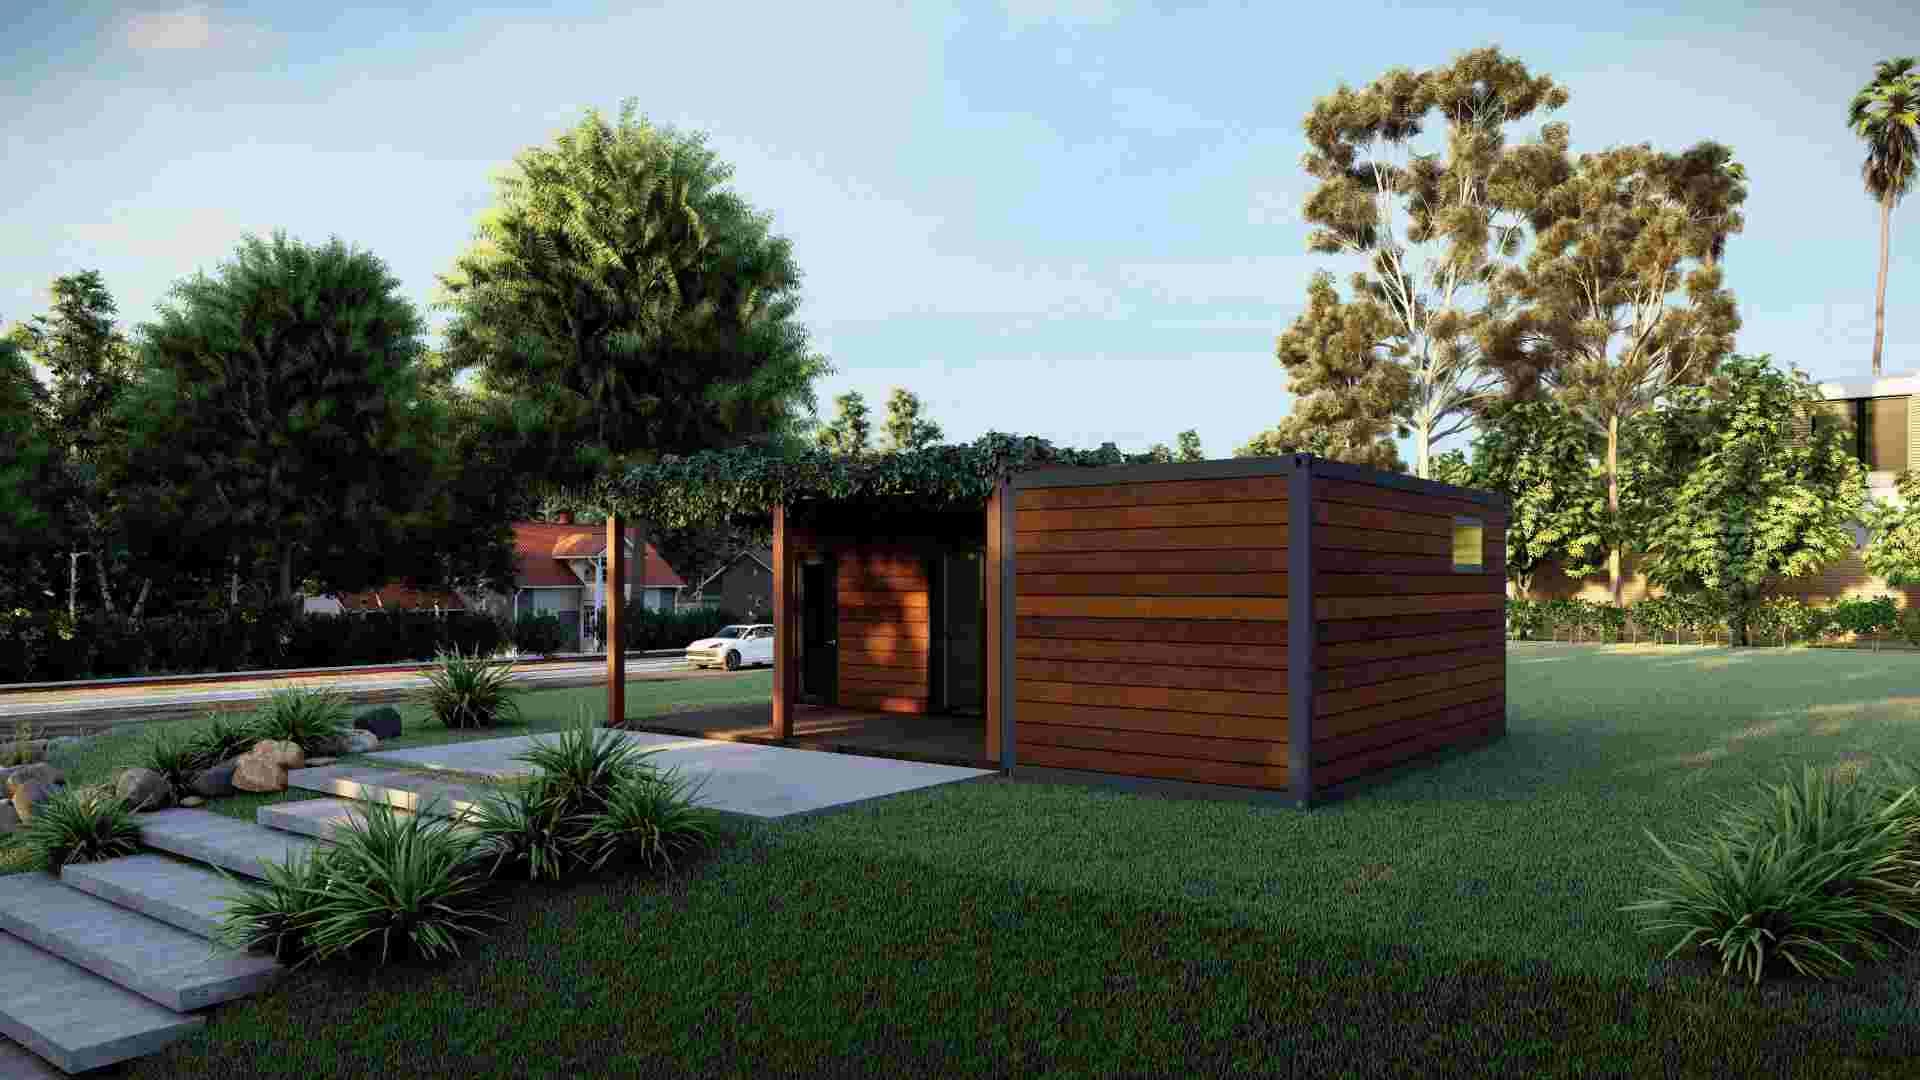 Superior Quality Combined Luxury Prefabricated Container Home Design-2X01